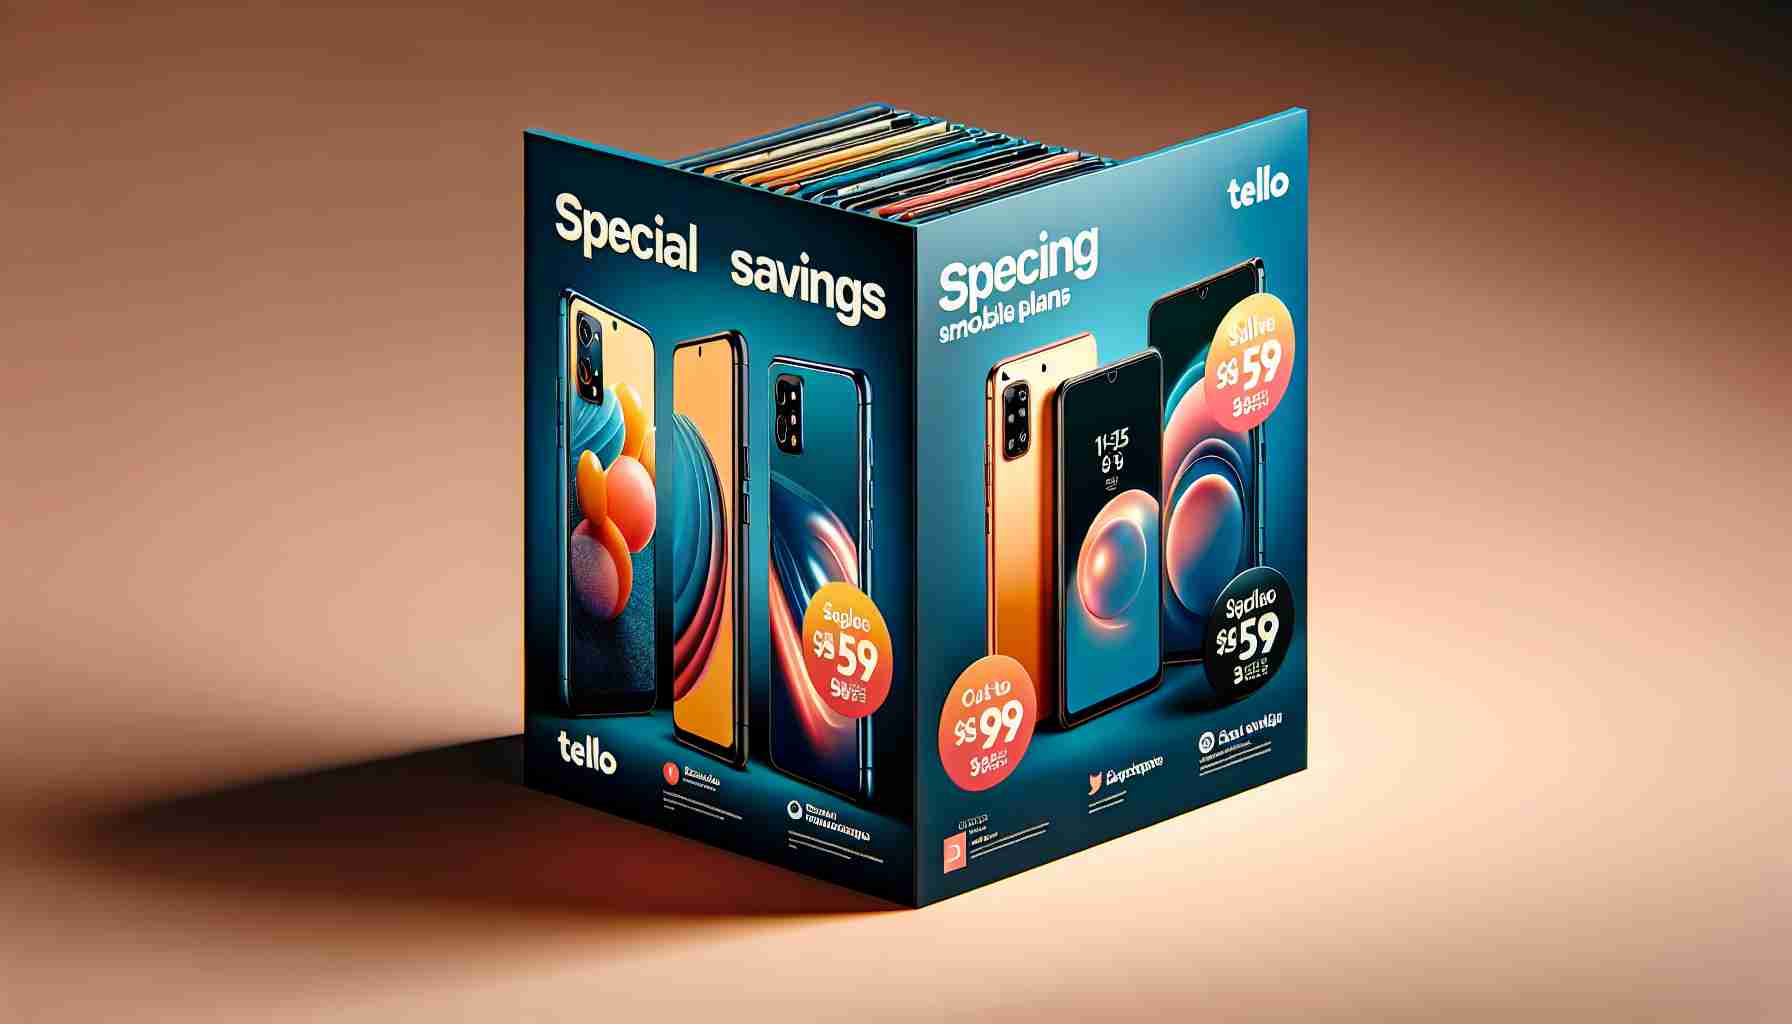 Special Savings on Tello Mobile Plans with Smartphone Discounts